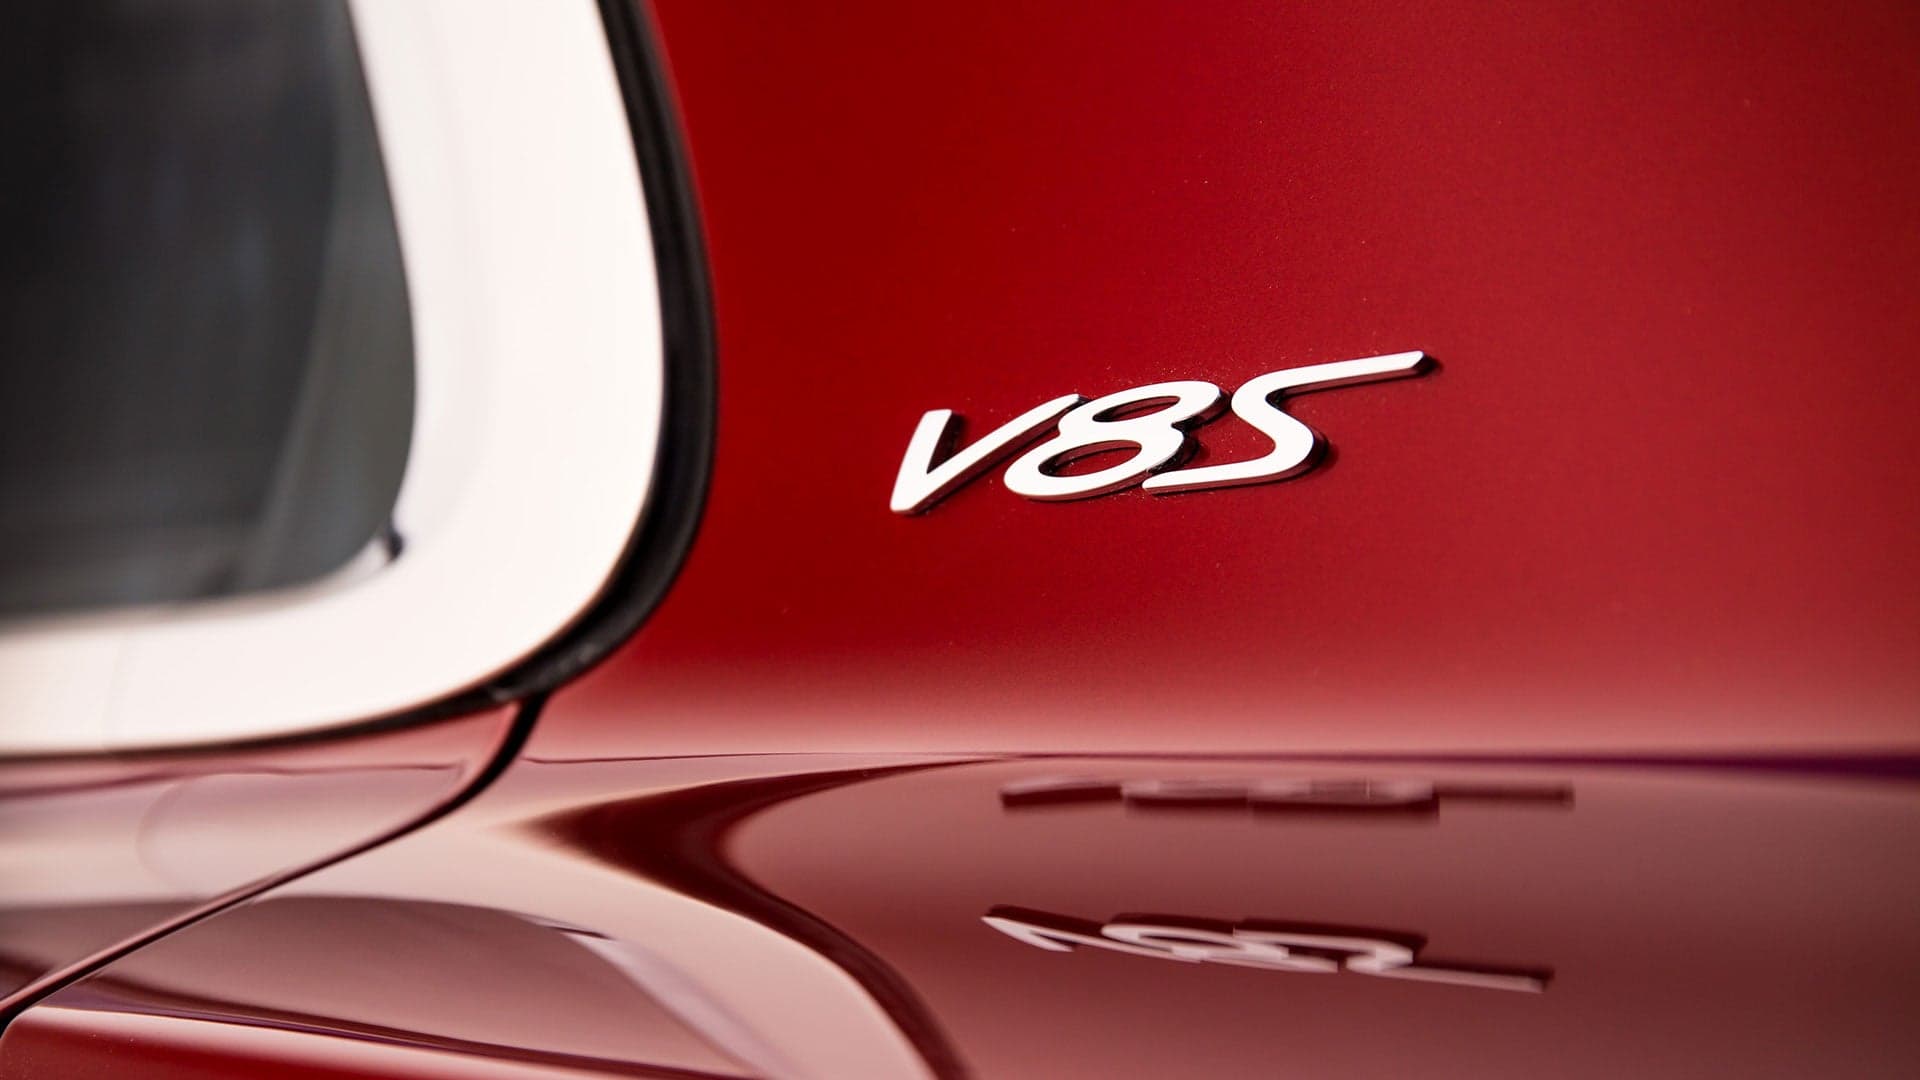 The Bentley Flying Spur’s “V8S” Logo Is Plain Wrong